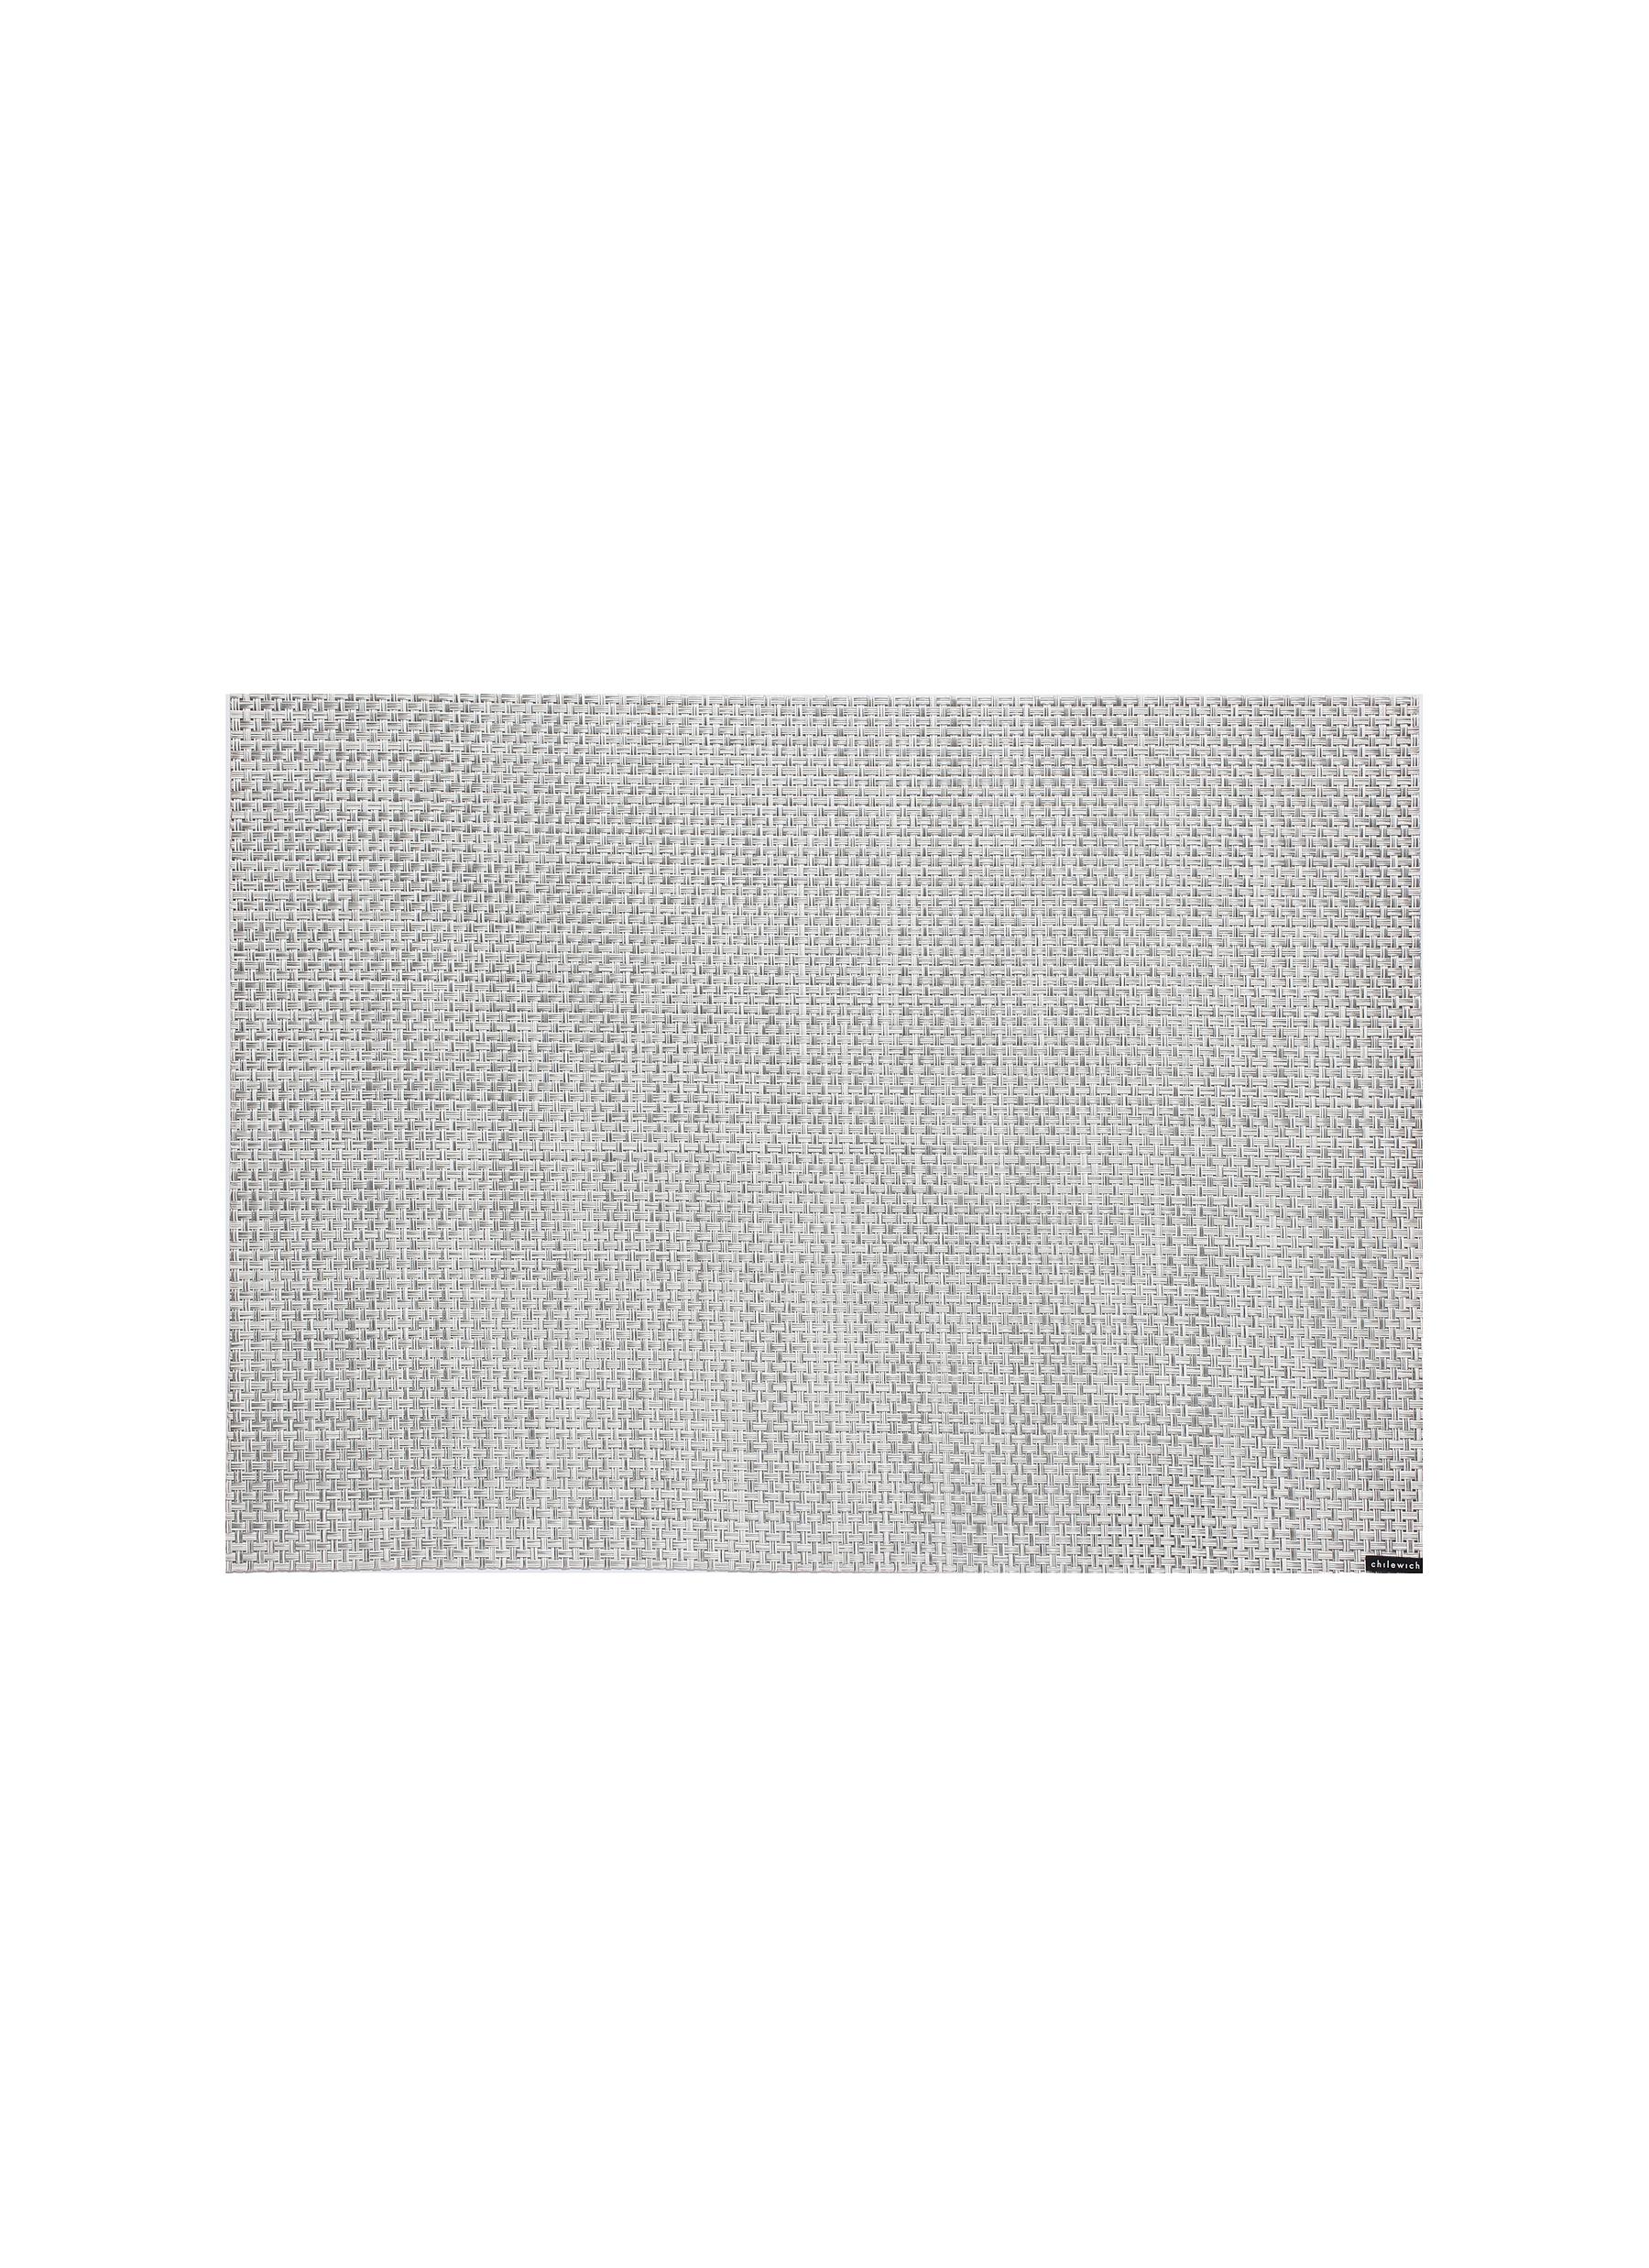 BASKETWEAVE COMPACT RECTANGLE PLACEMAT - WHITE SILVER